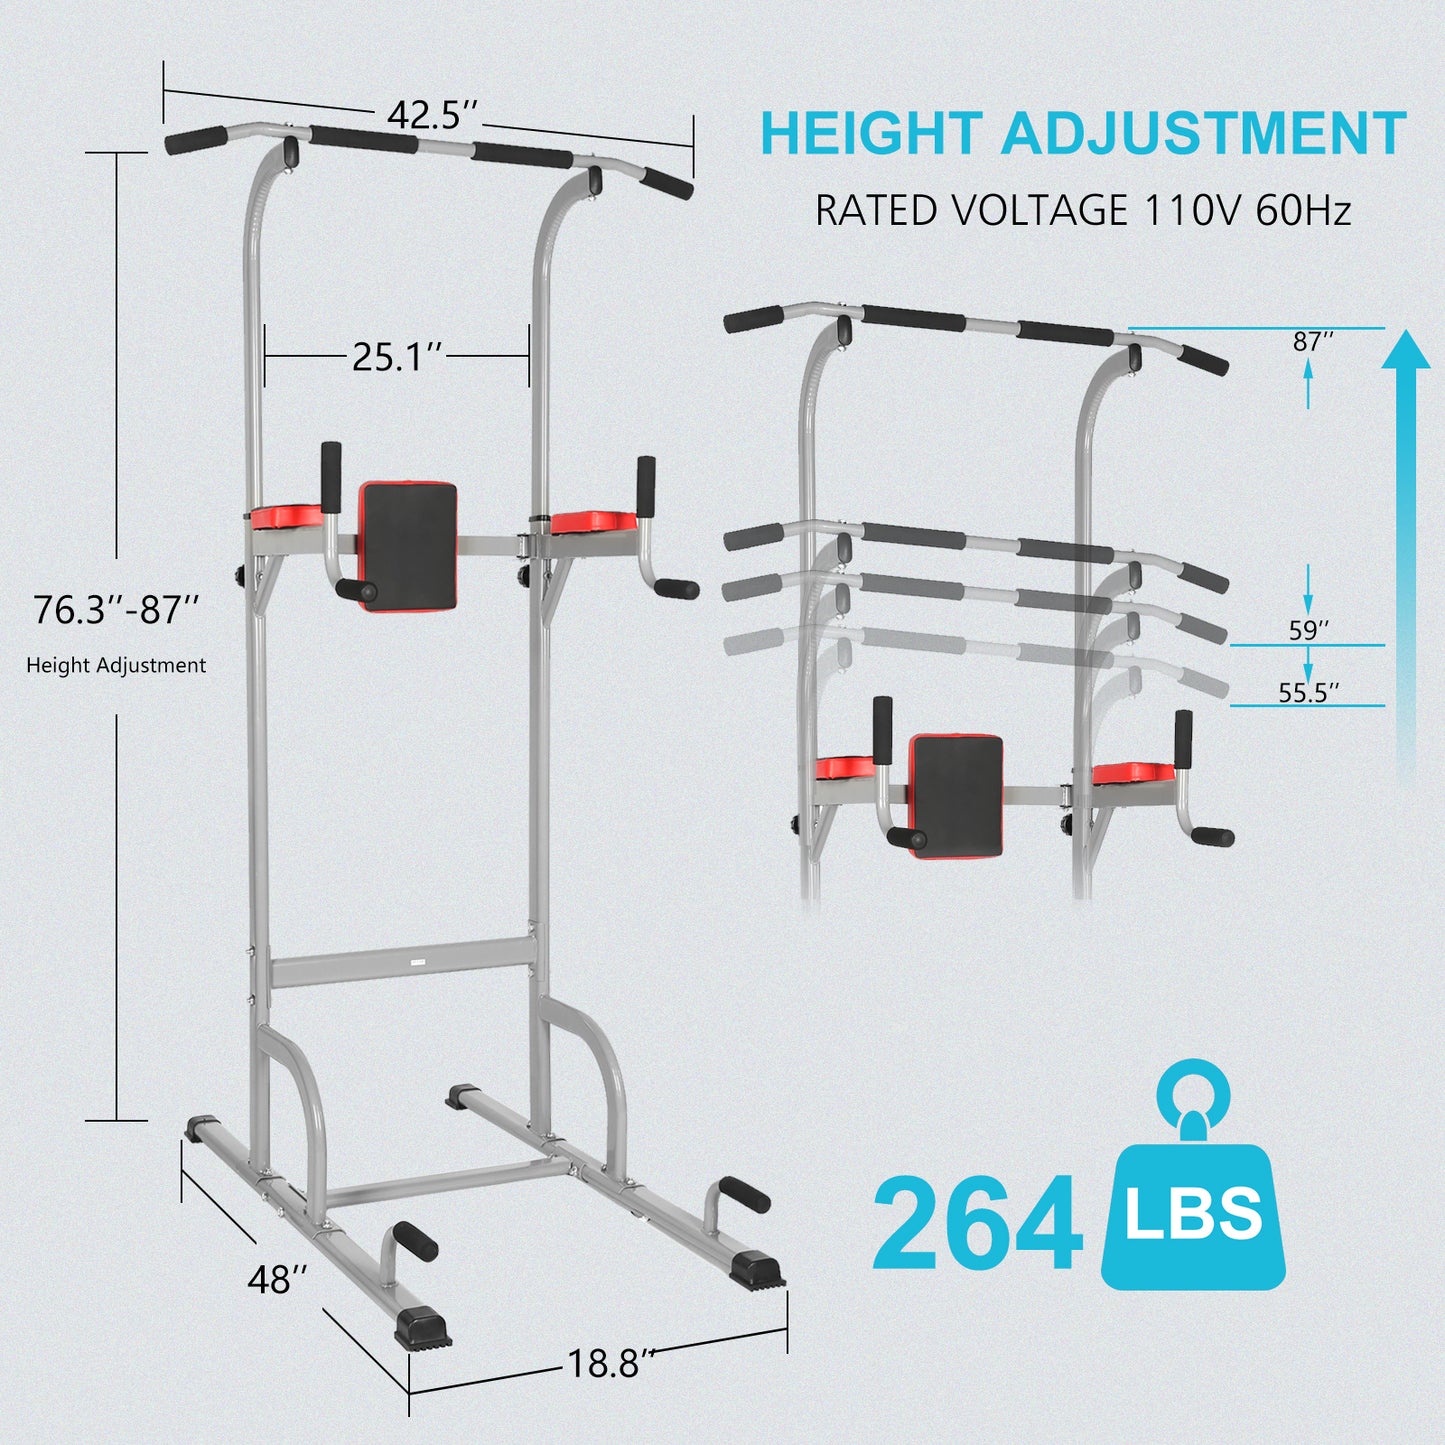 YSSOA Adjustable Dip Stand Power Tower, Home Gym Fitness Equipment, 11-Gear Height Adjustment, 6 in 1 Multifunctional for Whole Body Workout, Black